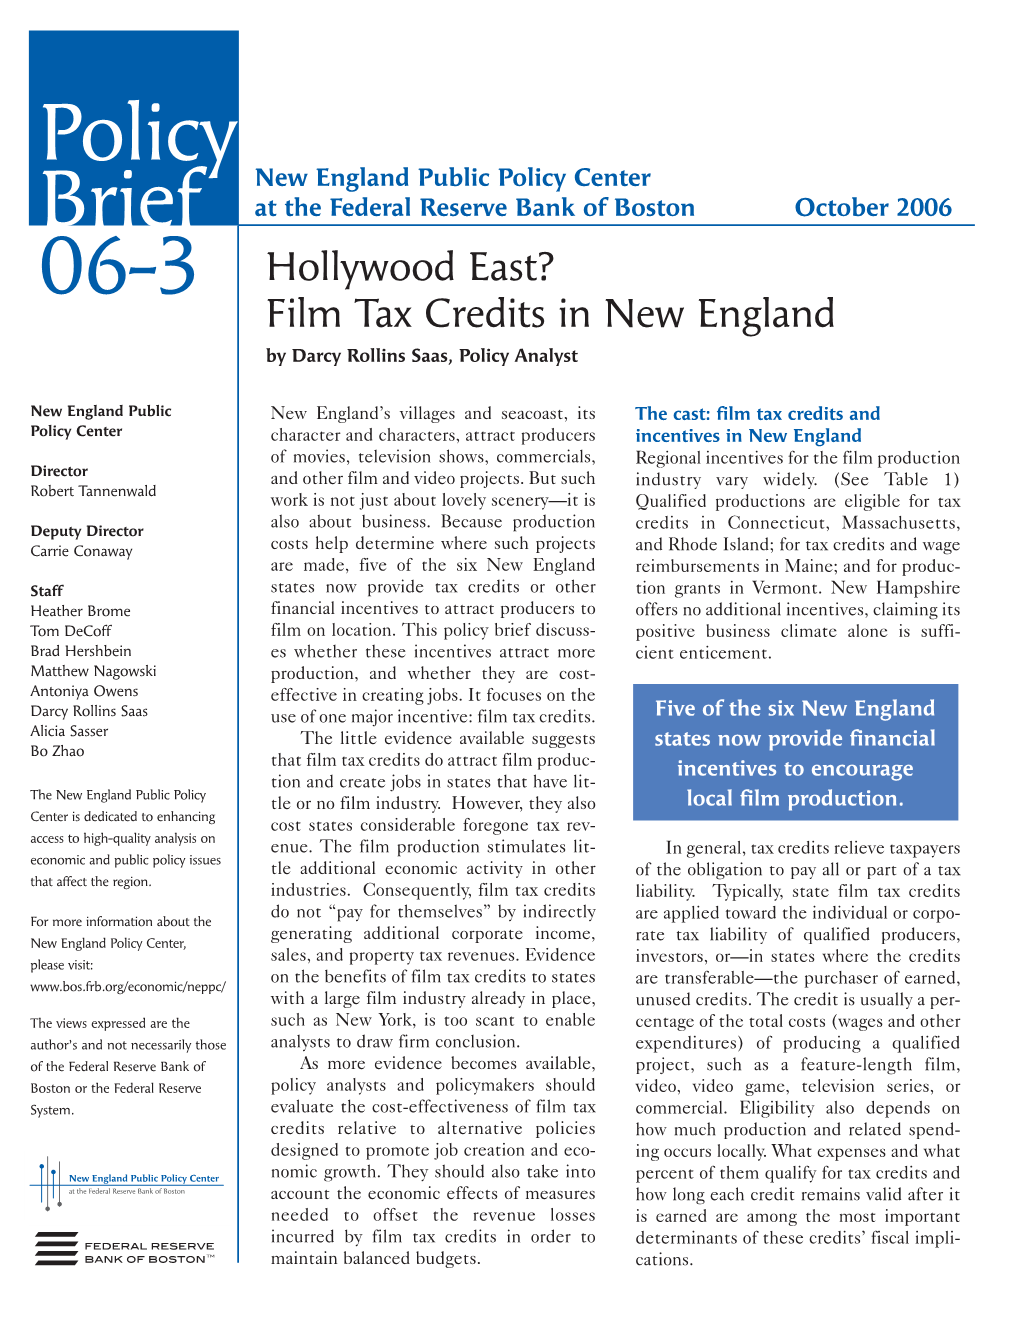 Film Tax Credits in New England by Darcy Rollins Saas, Policy Analyst